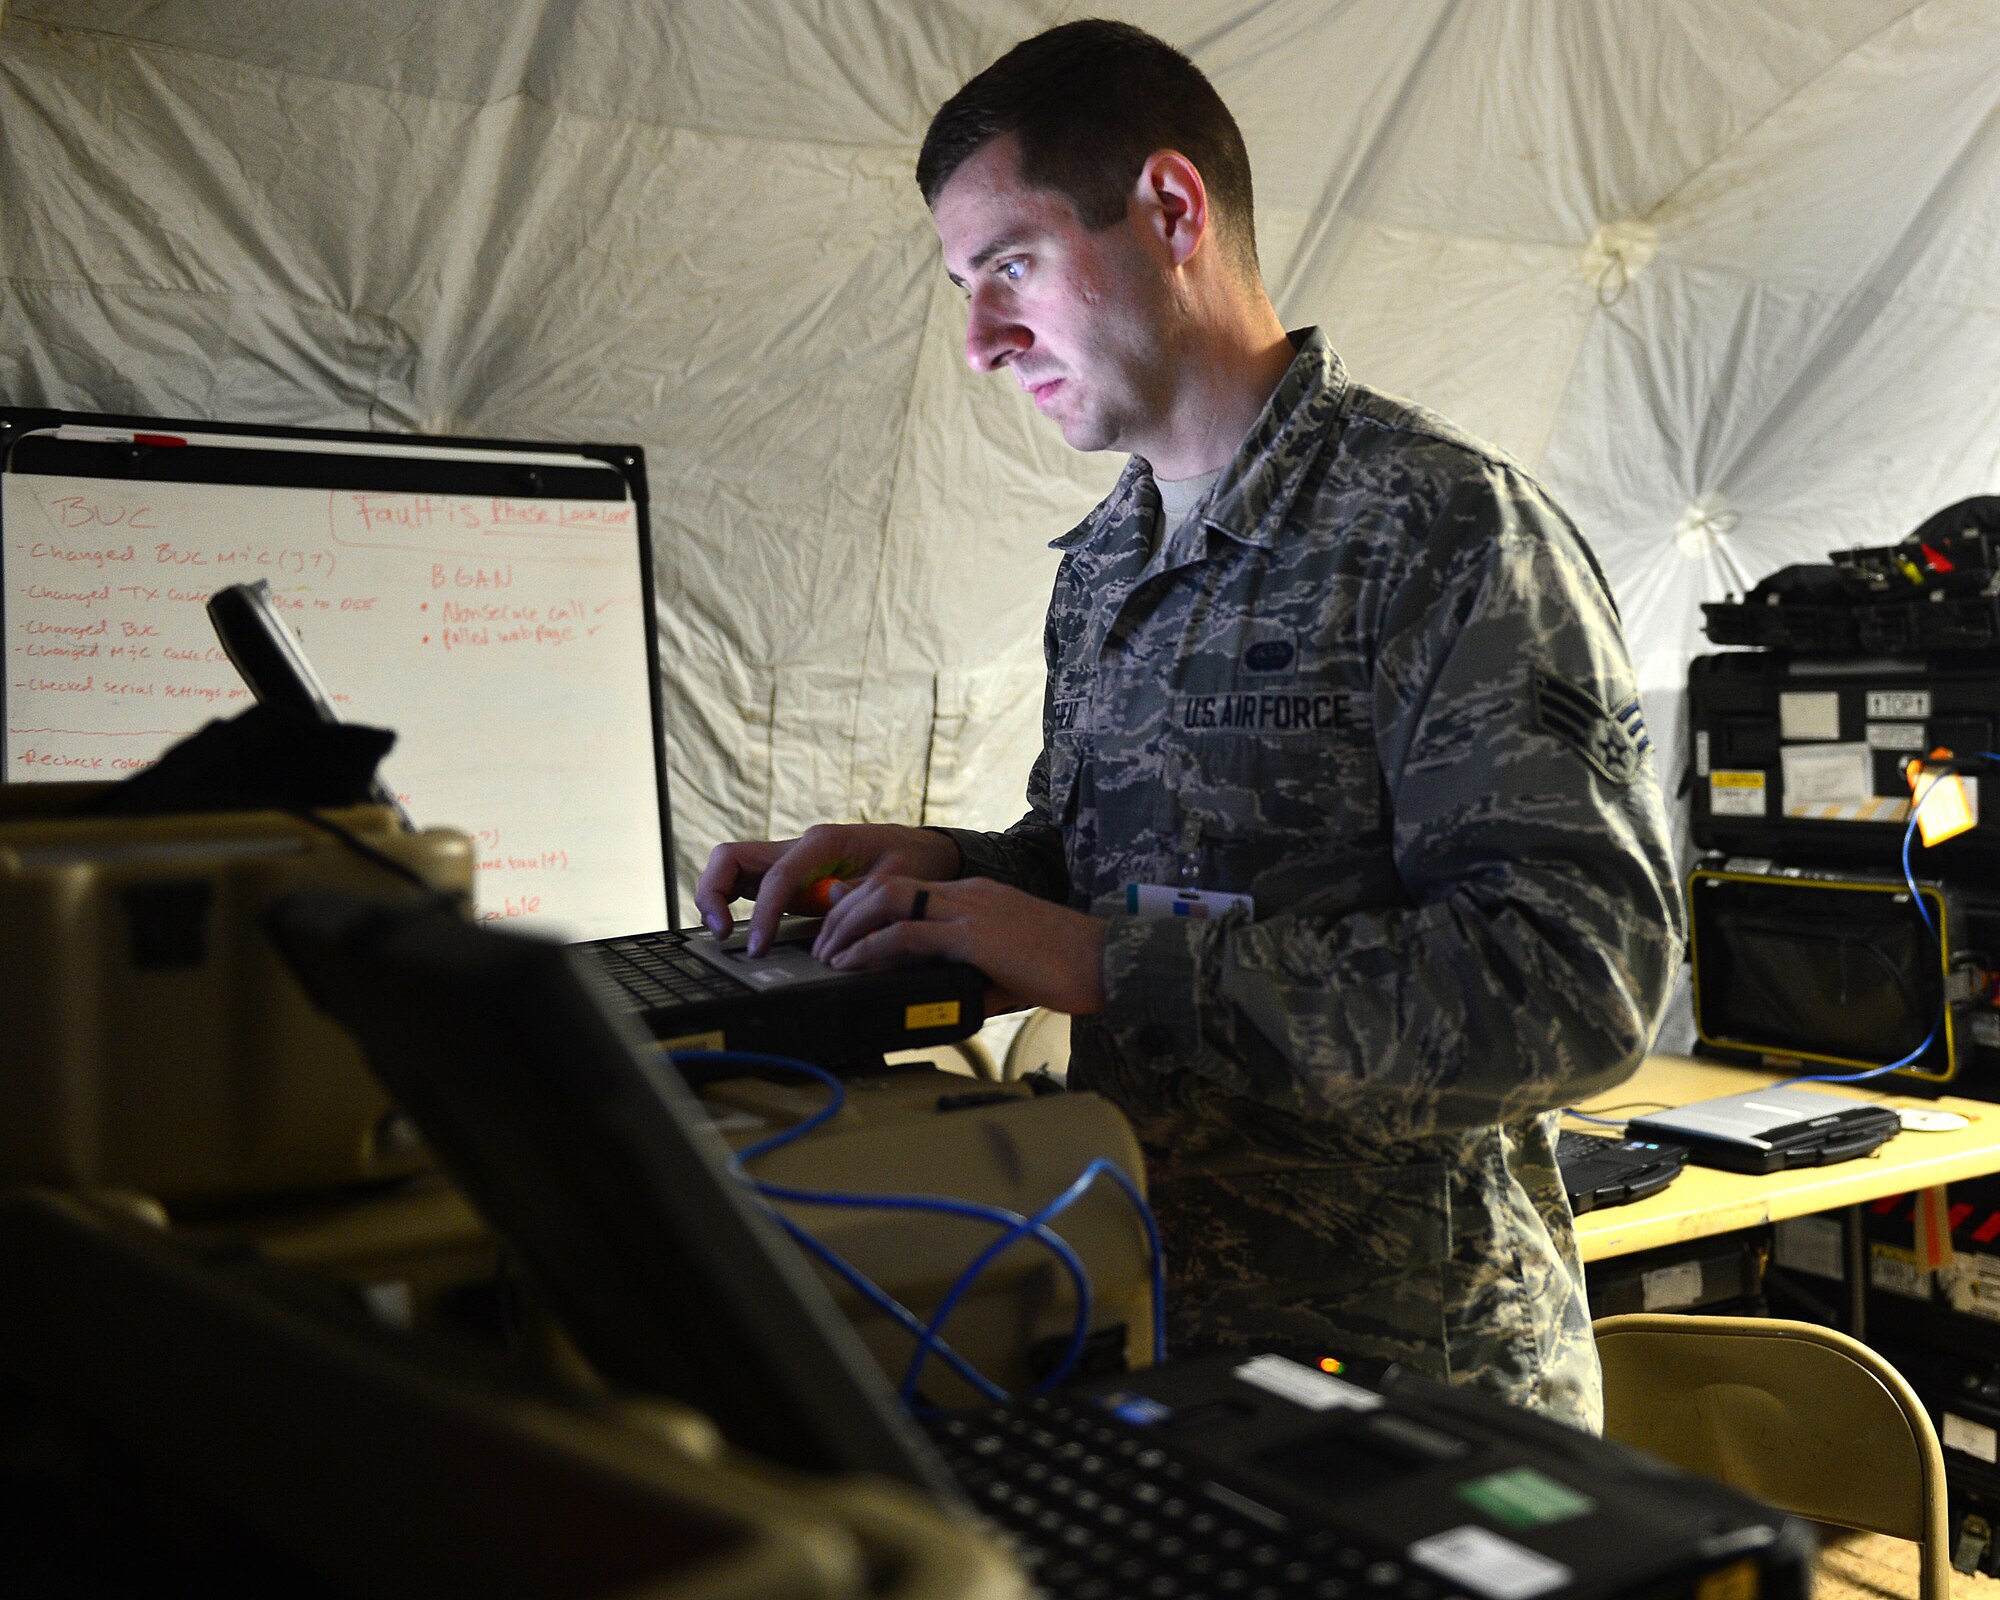 Senior Airman Mitchell Moorehead, 52nd Combat Communications Squadron Radio Frequency transmission specialist, setup communication centers in support of exercise Juniper Cobra 16 in Israel, Jan. 15, 2016. Juniper Cobra uses ballistic missile defense computer simulations to train U.S. and Israeli service members while reinforcing a strong military relationship. For the first time, Airmen from multiple units work together to support U.S. European Command. (U.S. Air Force Staff Sgt. Stephanie Longoria/Released)